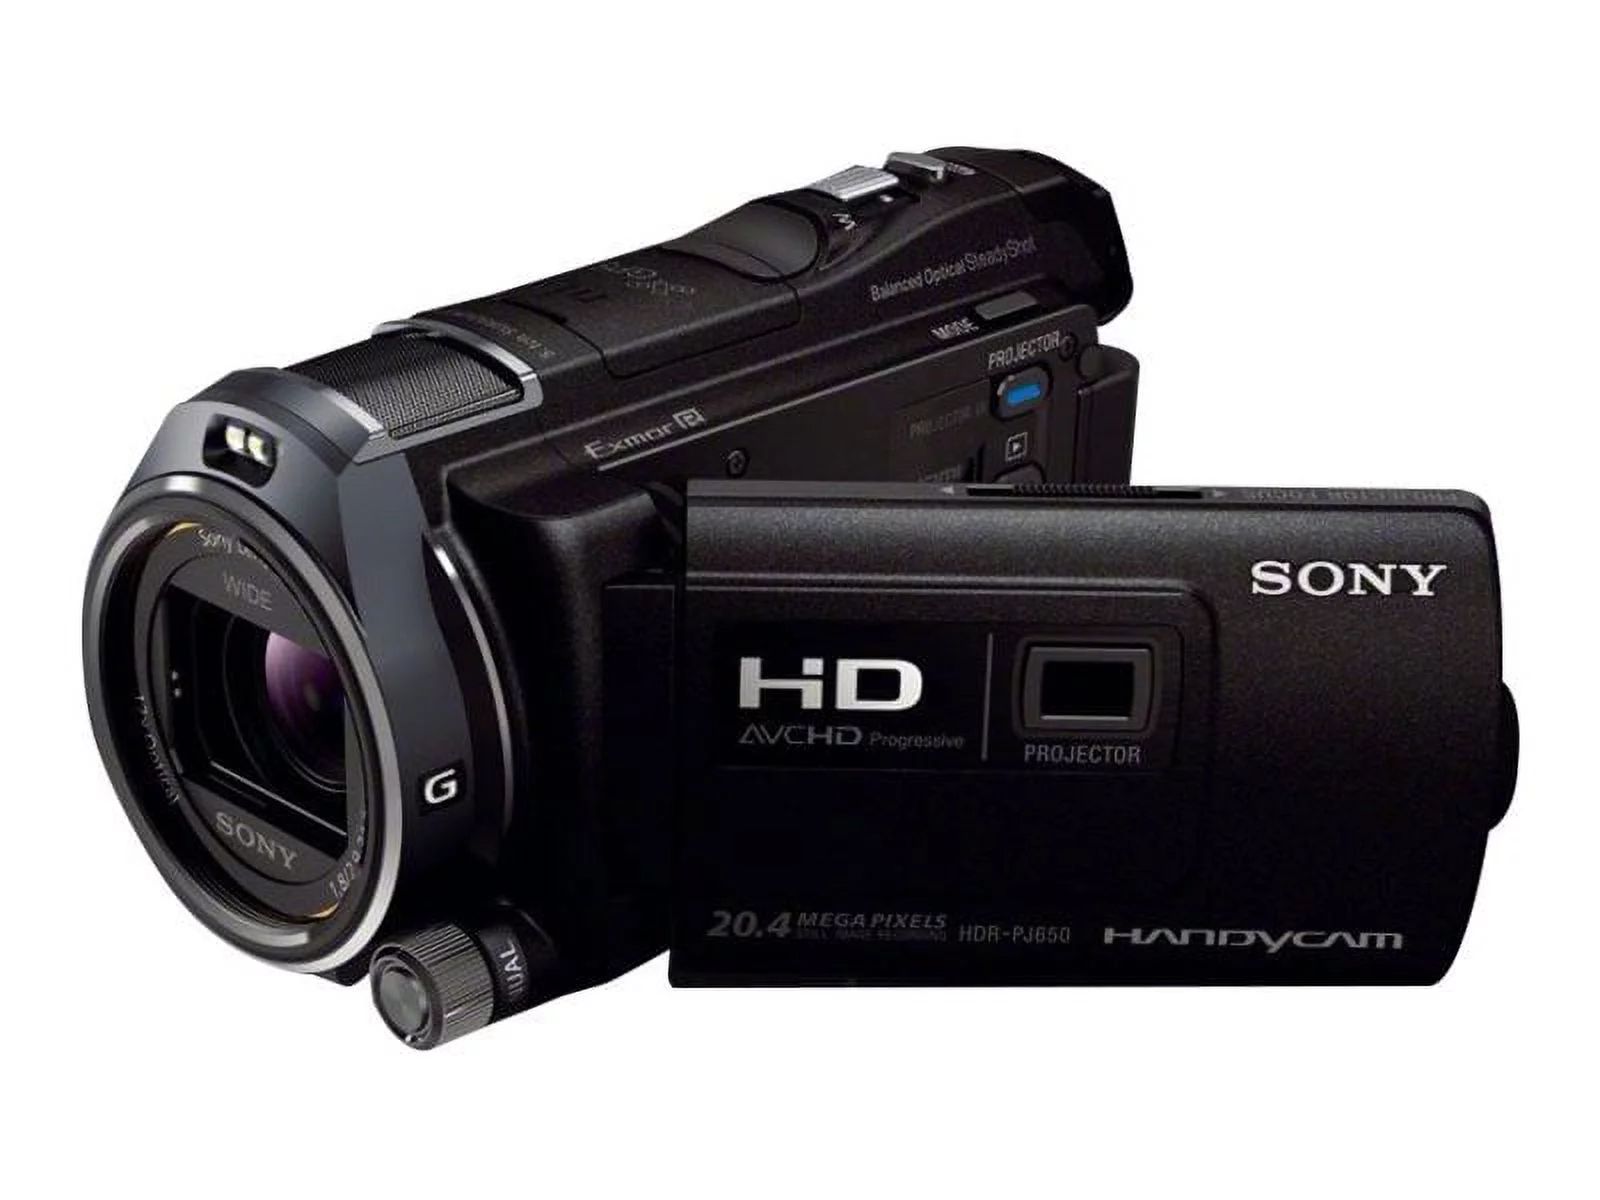 How To Get Videos Off Of A Sony Hard Disk Drive Video Camera That Won’t Turn On